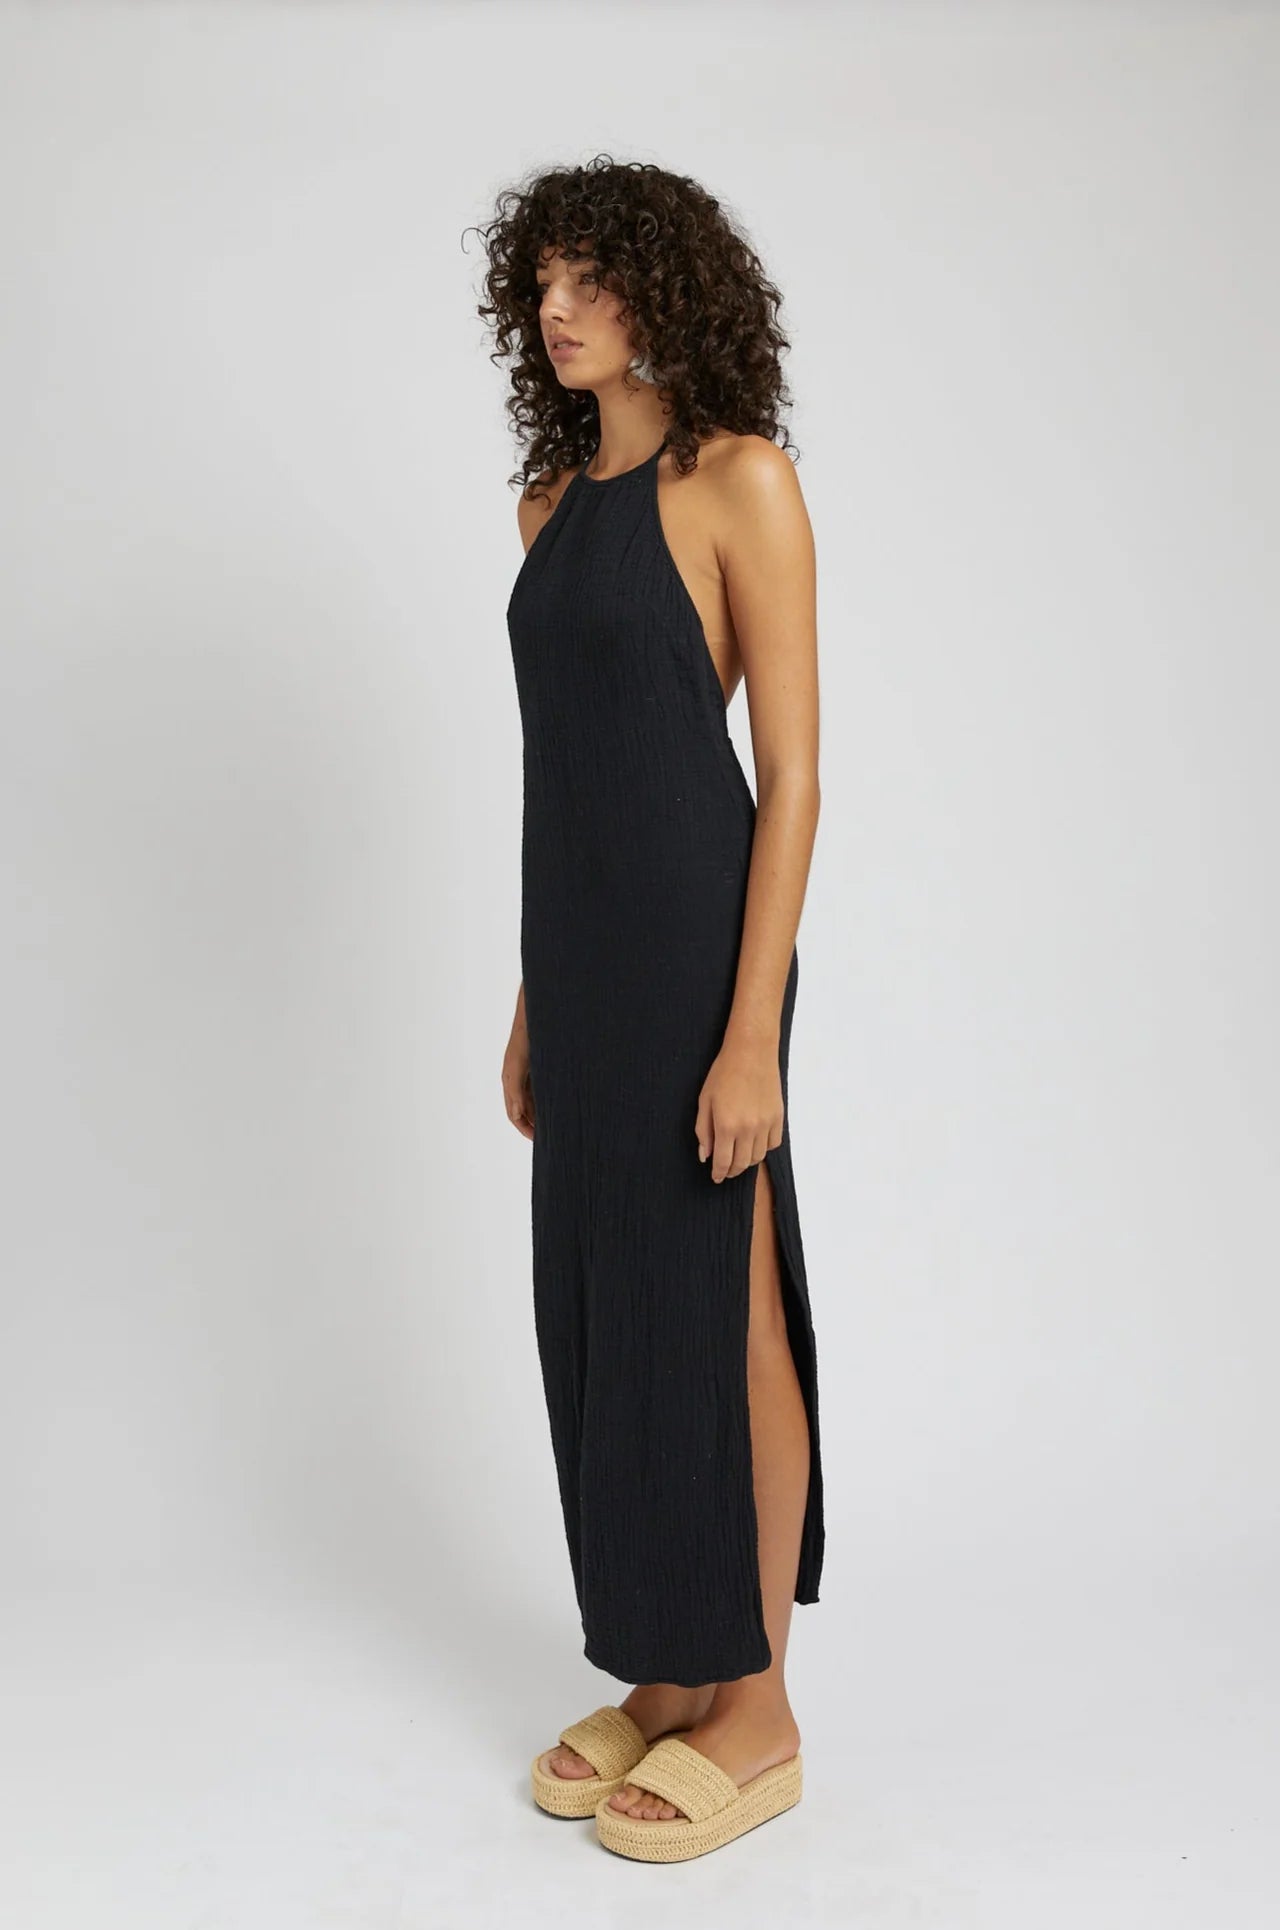 Get ready to turn heads in our Backless Halter Dress! Made from airy cotton gauze, this dress is perfect for those hot summer days. Show off your sultry side with its open back and halter neckline. Available in chic charcoal.